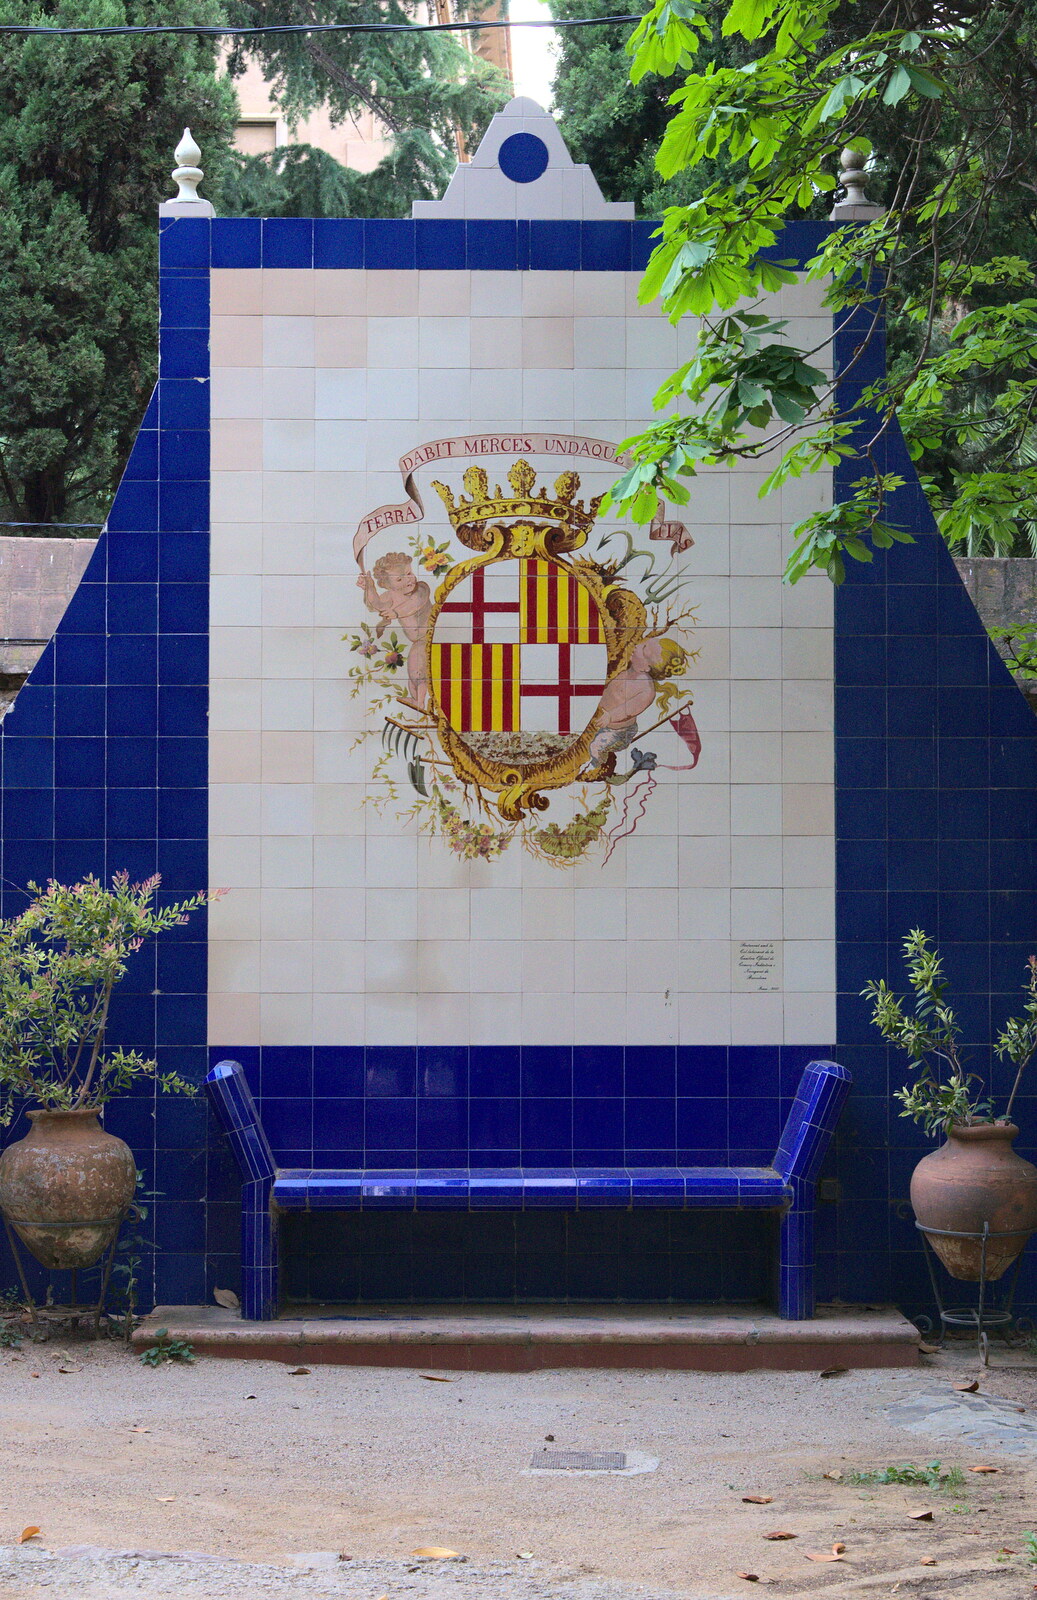 A tiled bench and mosaic from The Open Education Challenge, Barcelona, Catalonia - 13th July 2014